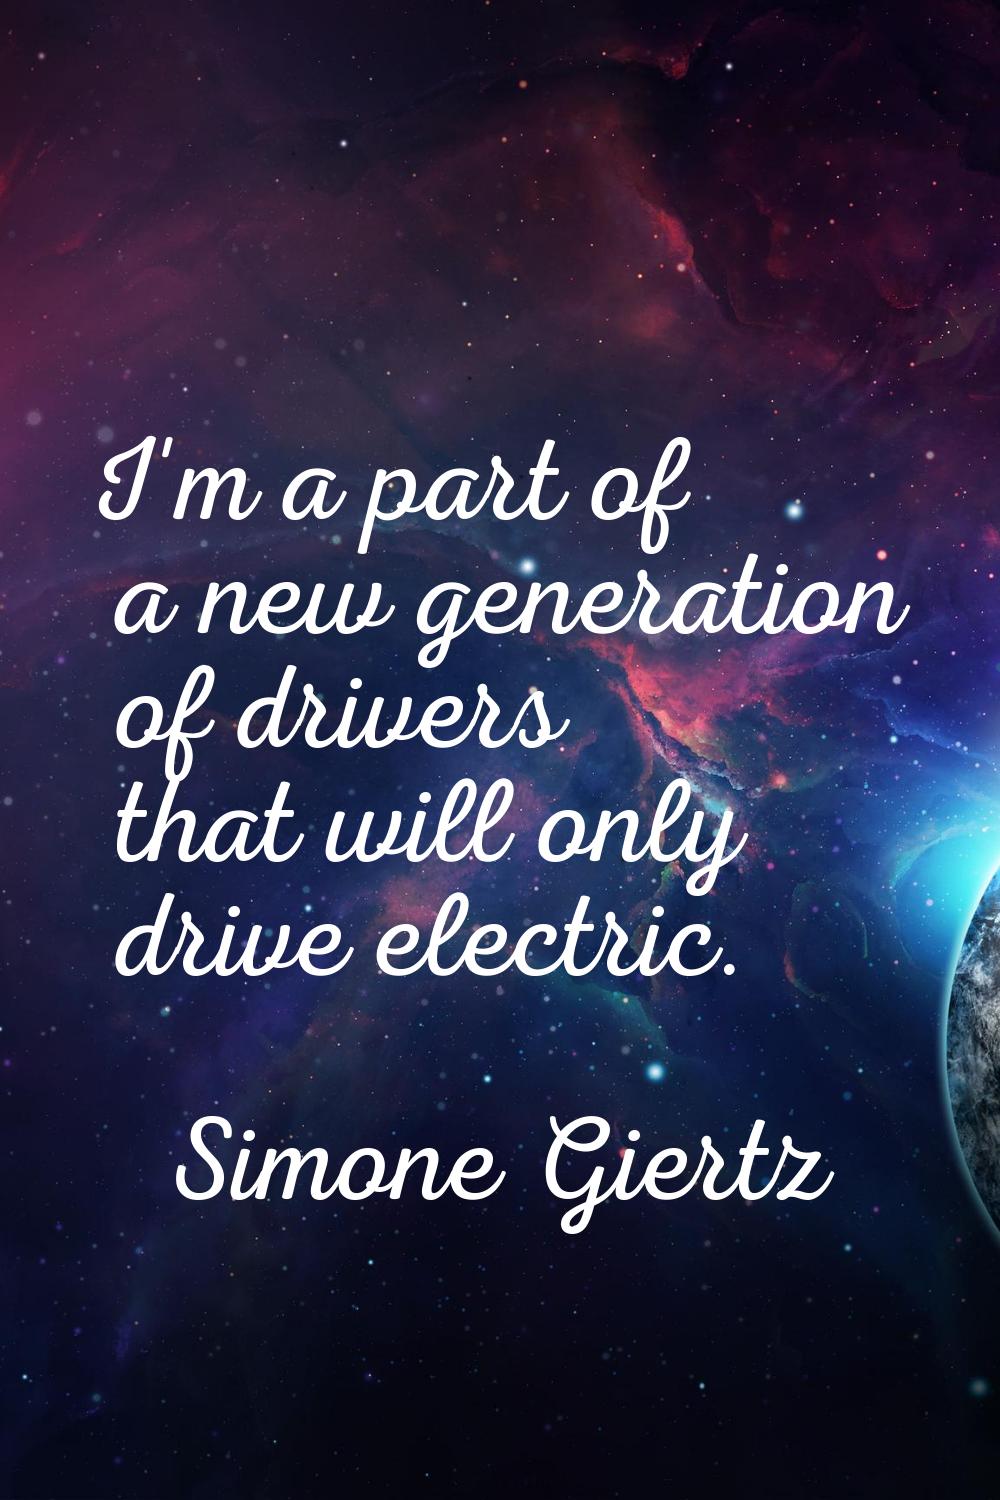 I'm a part of a new generation of drivers that will only drive electric.